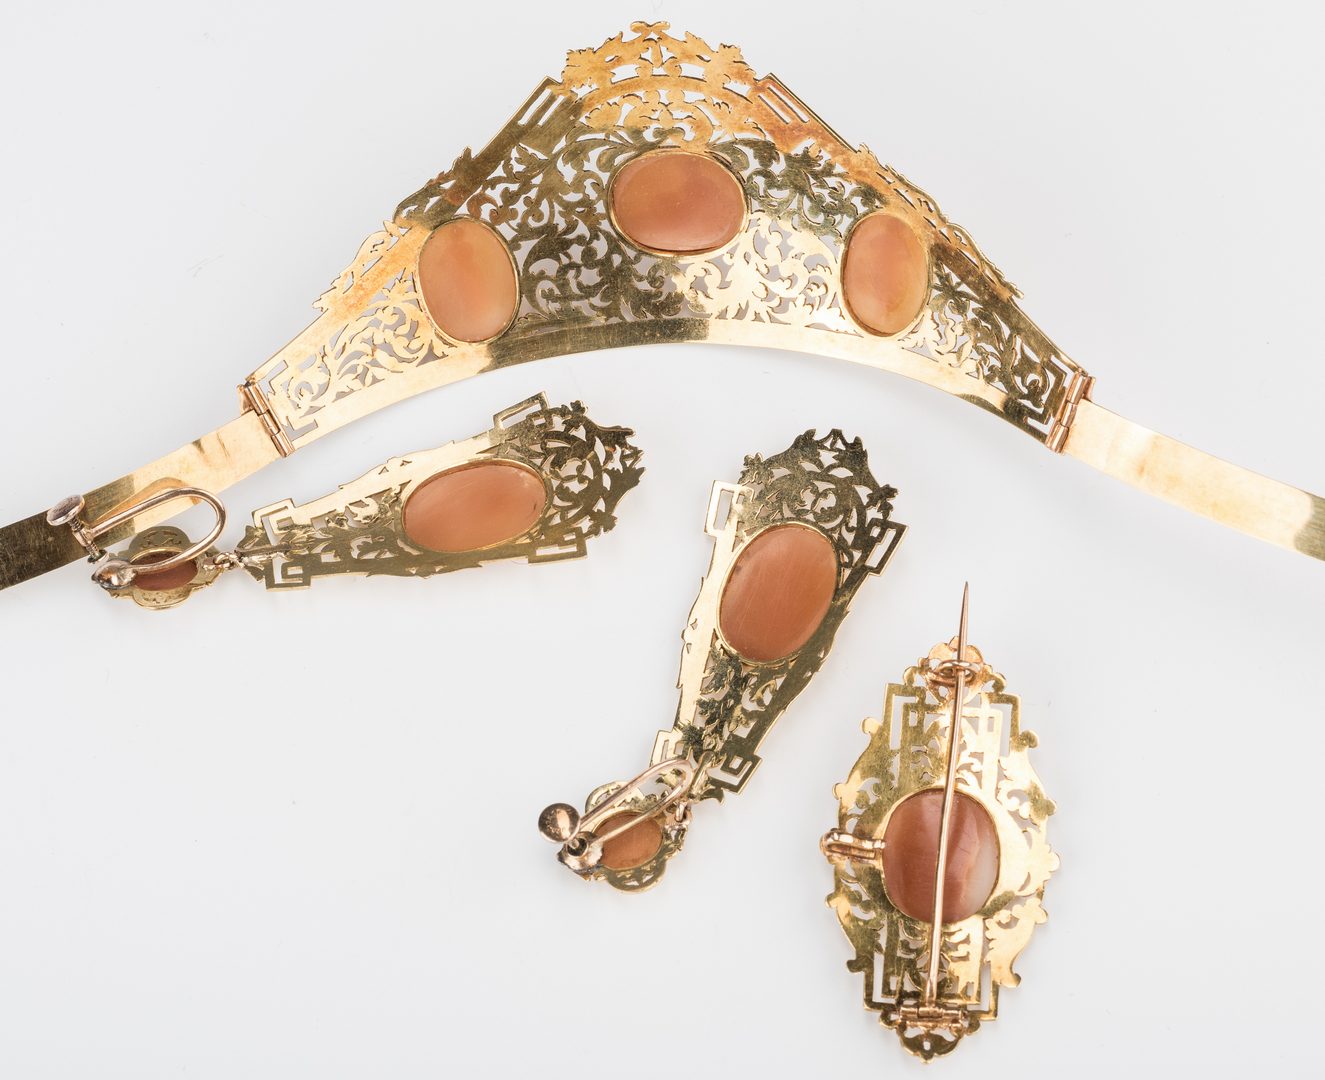 Lot 45: Gold and Shell Cameo Parure Circa 1810 | Case Auctions